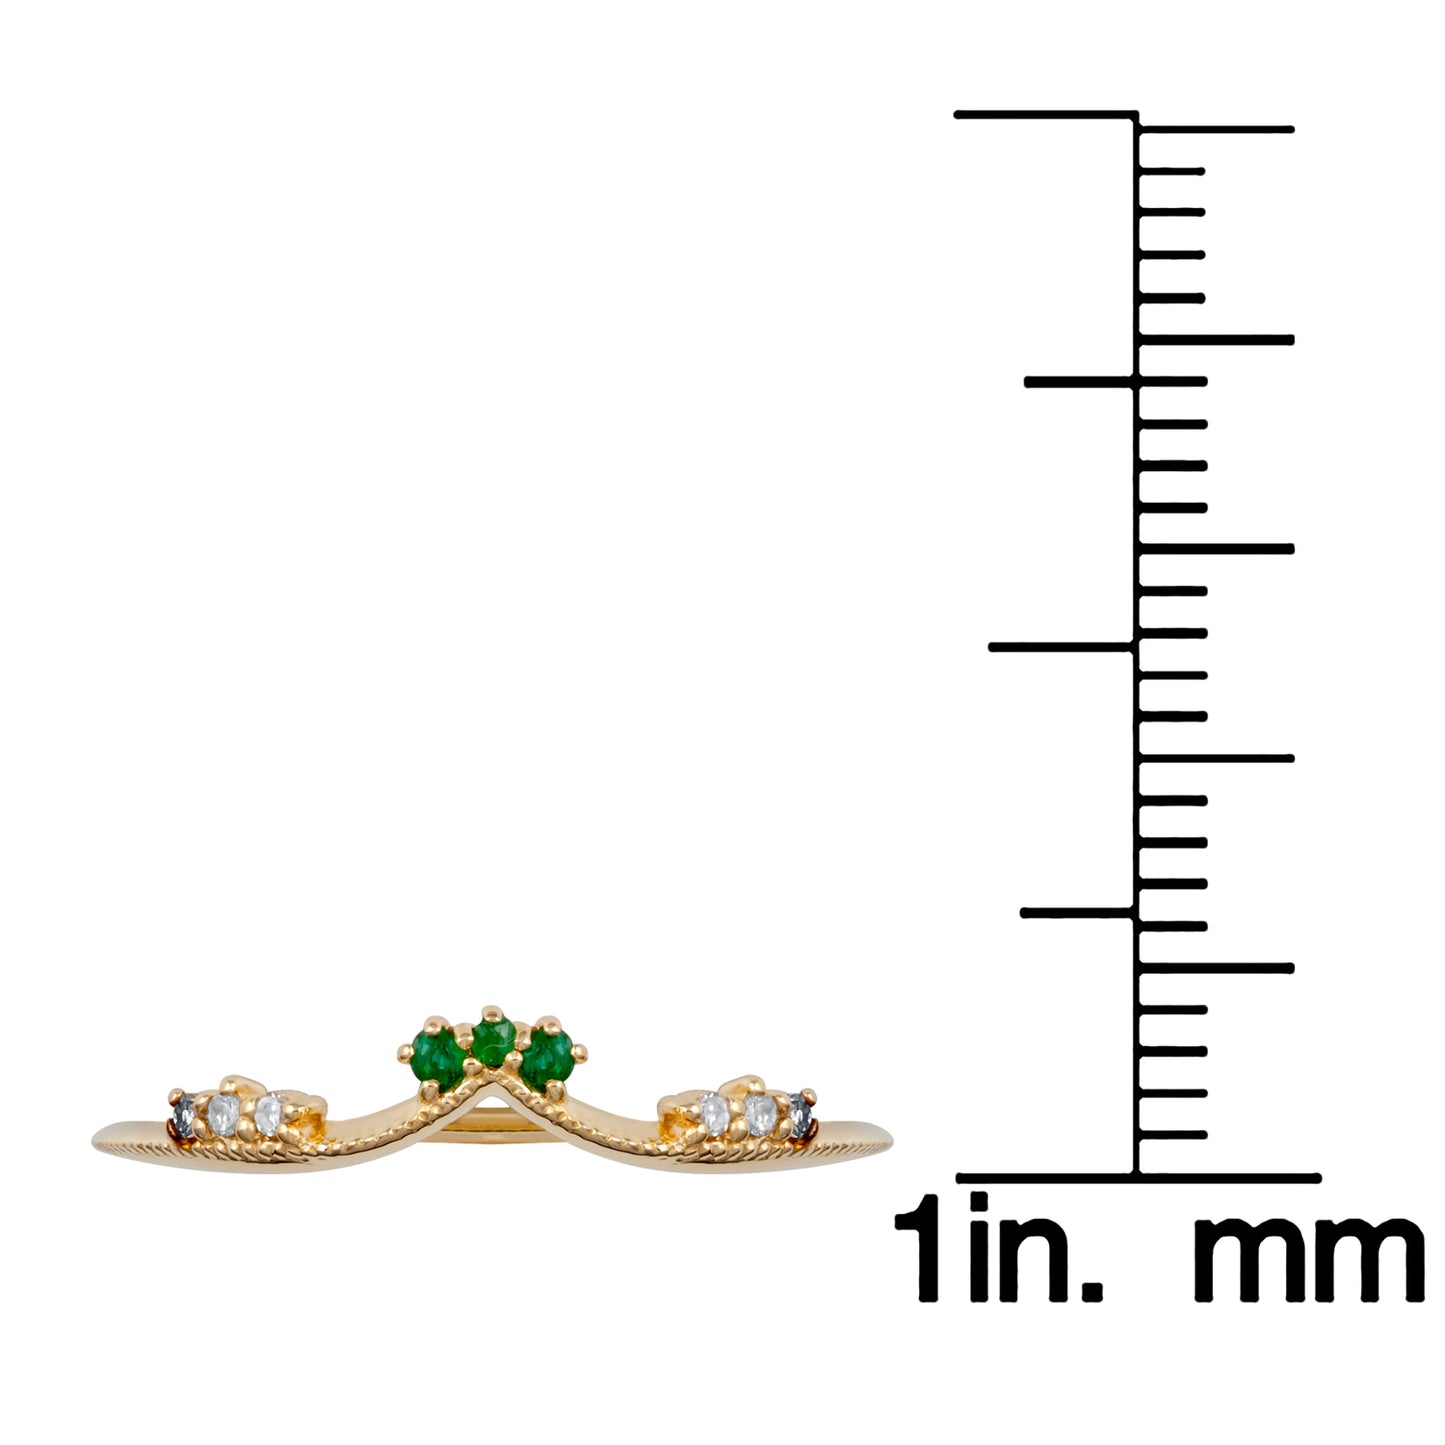 10k Yellow Gold Curved Genuine Emerald and Diamond Band Guard